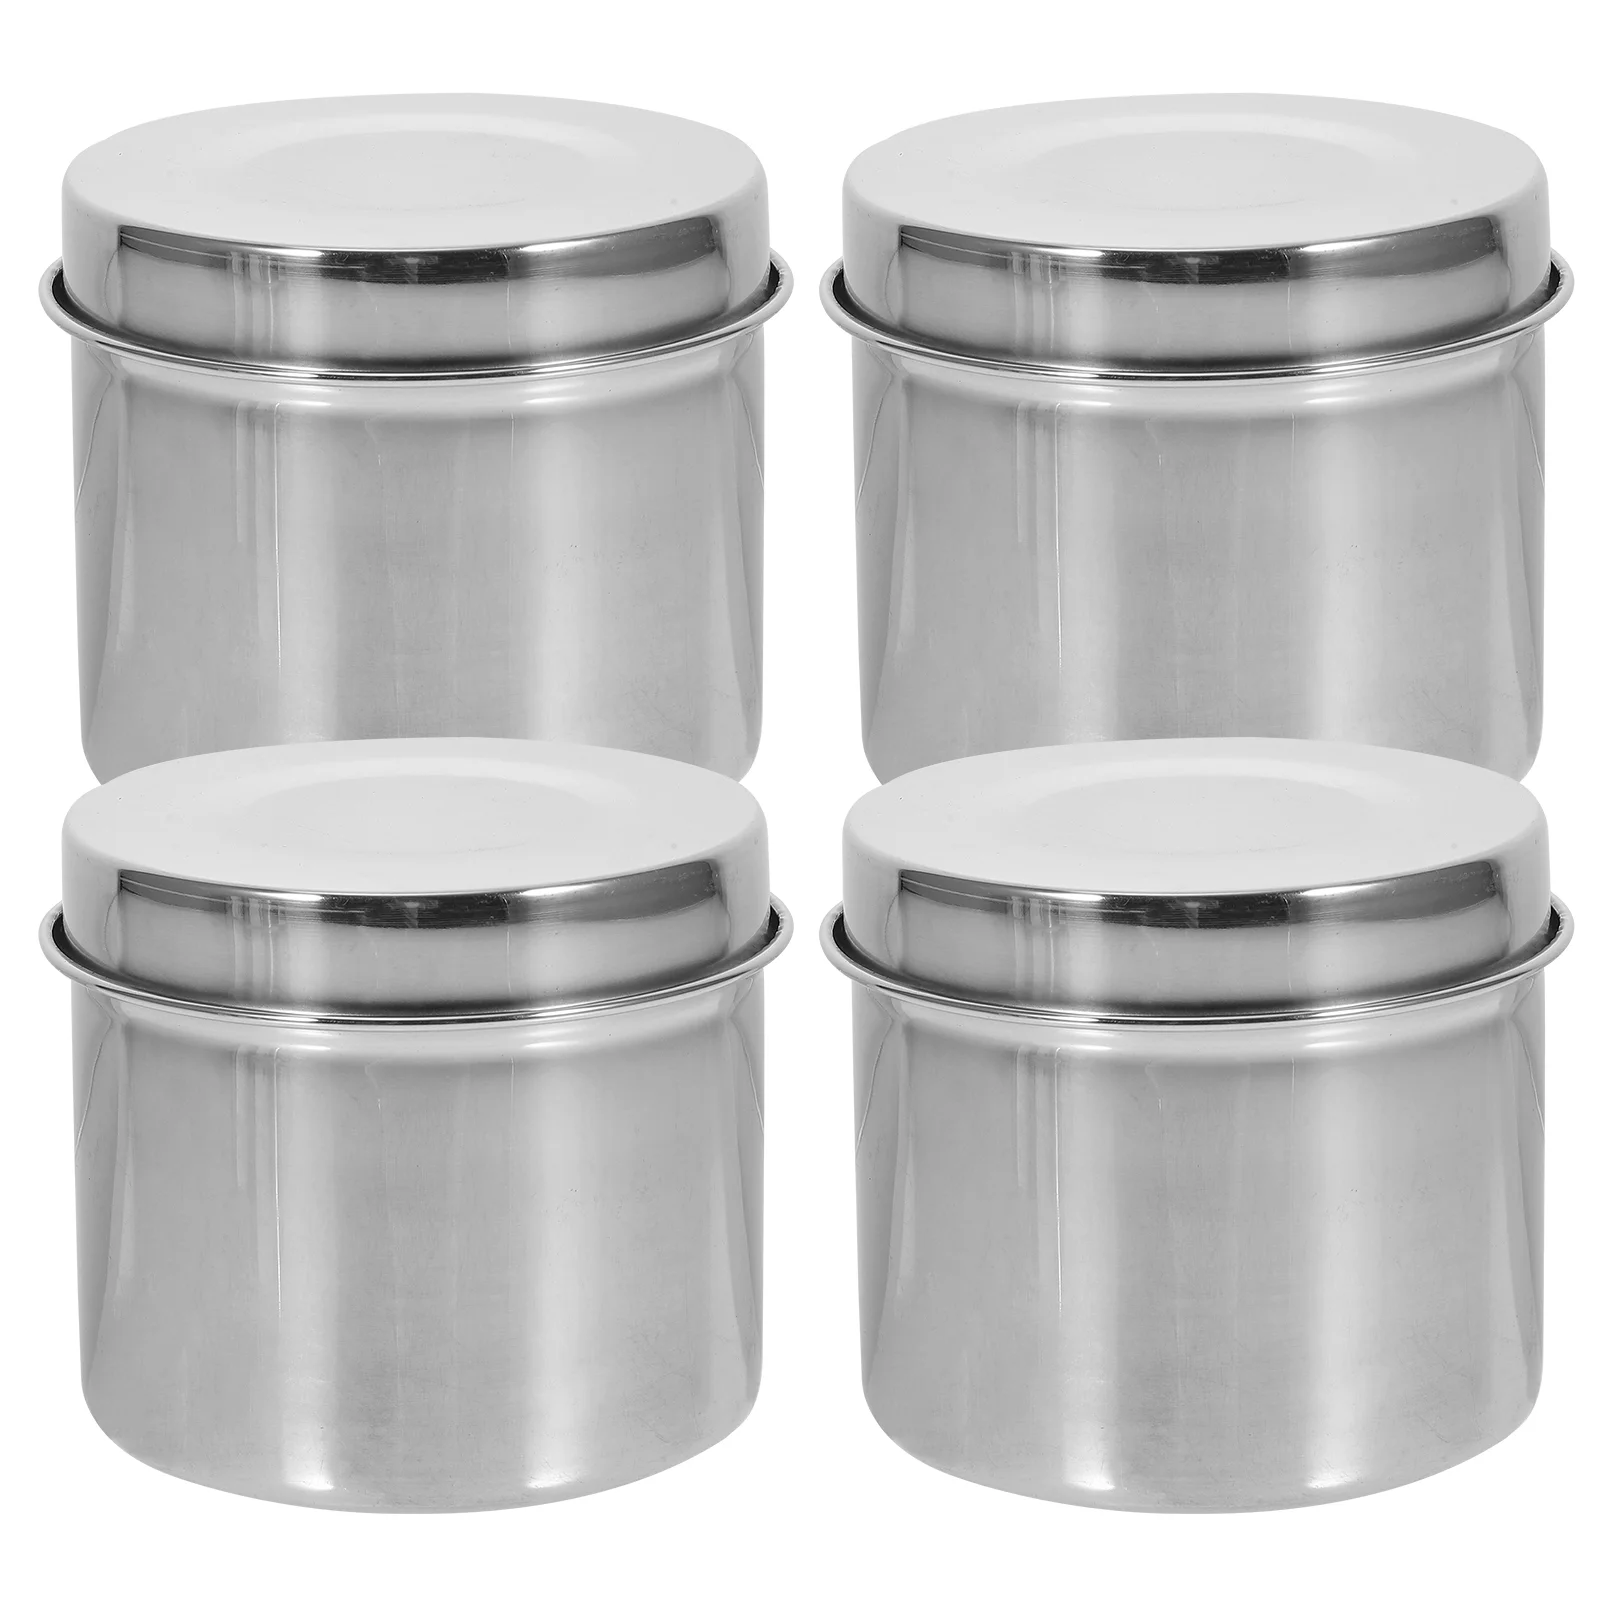 

Storage Containers Box Container Stainless Metal Lunch Lids Steel Huge Bento Large Sushi Prep Meal Camping Snack Picnic Airtight